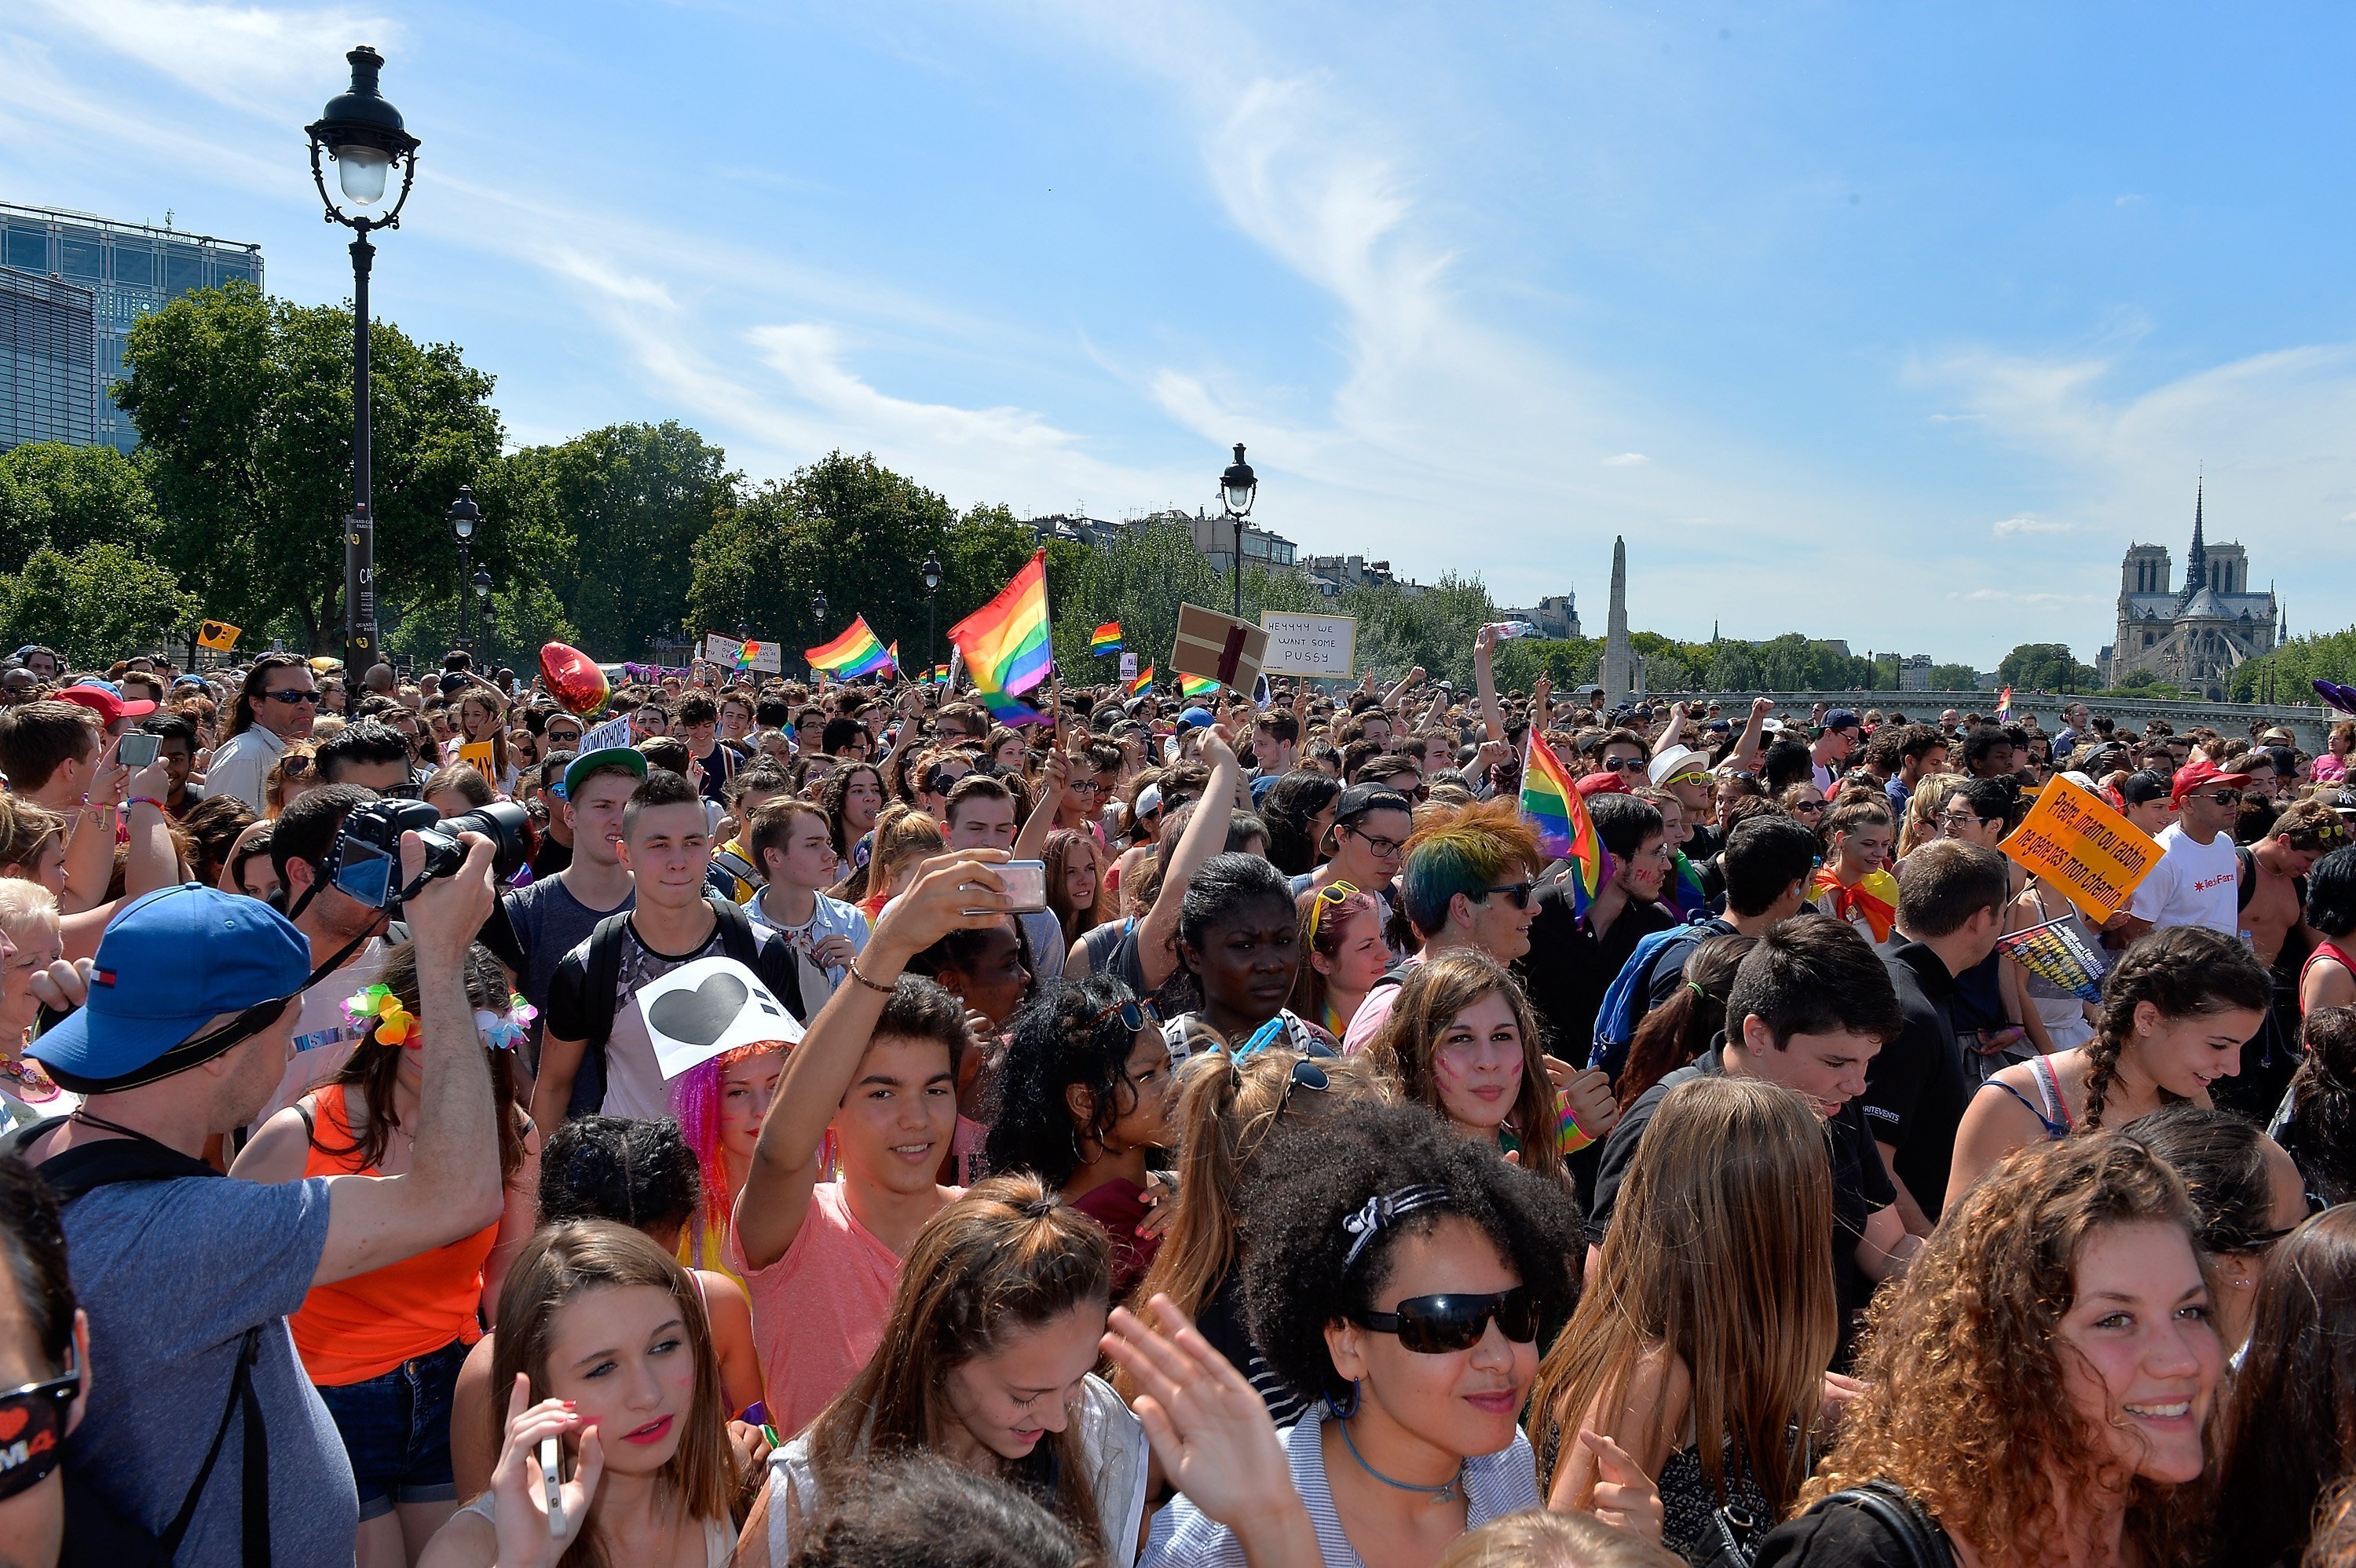 Thousands gathered to support gay rights at the Gay Pride Parade in Paris | Photo: Getty Images